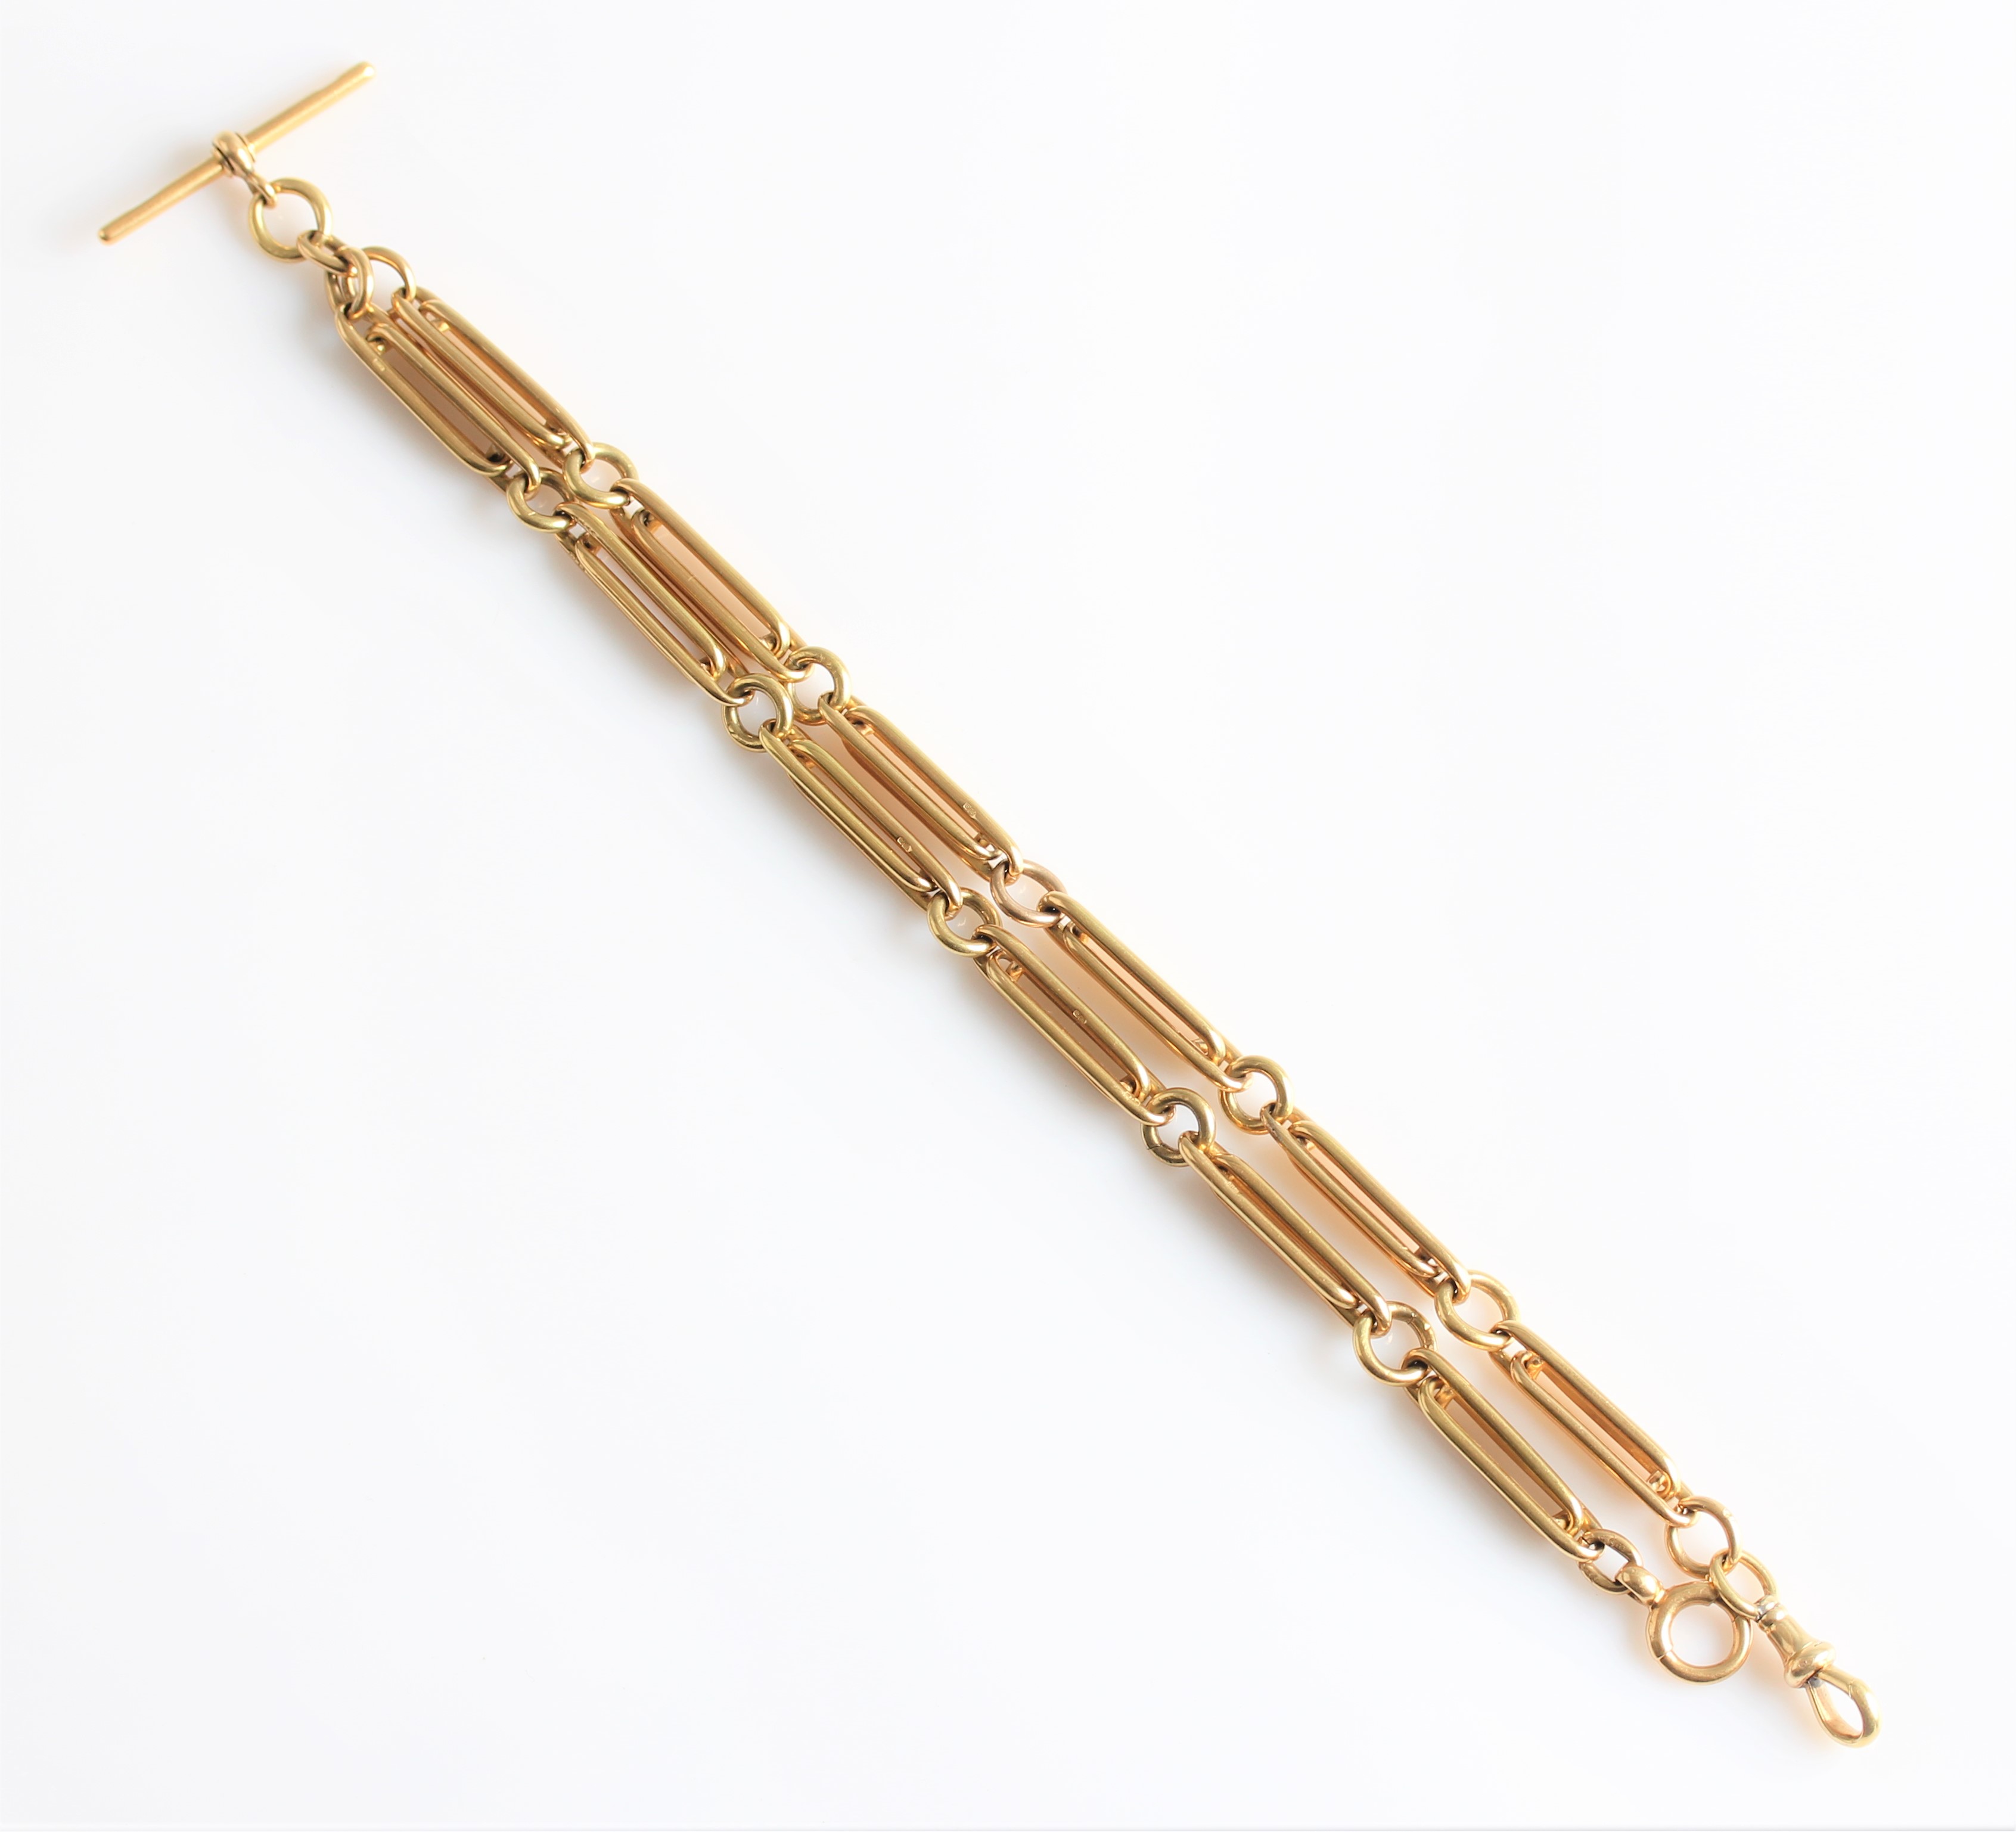 An 18ct yellow gold fancy belcher link double Albert watch chain, with T-bar, a spring ring and